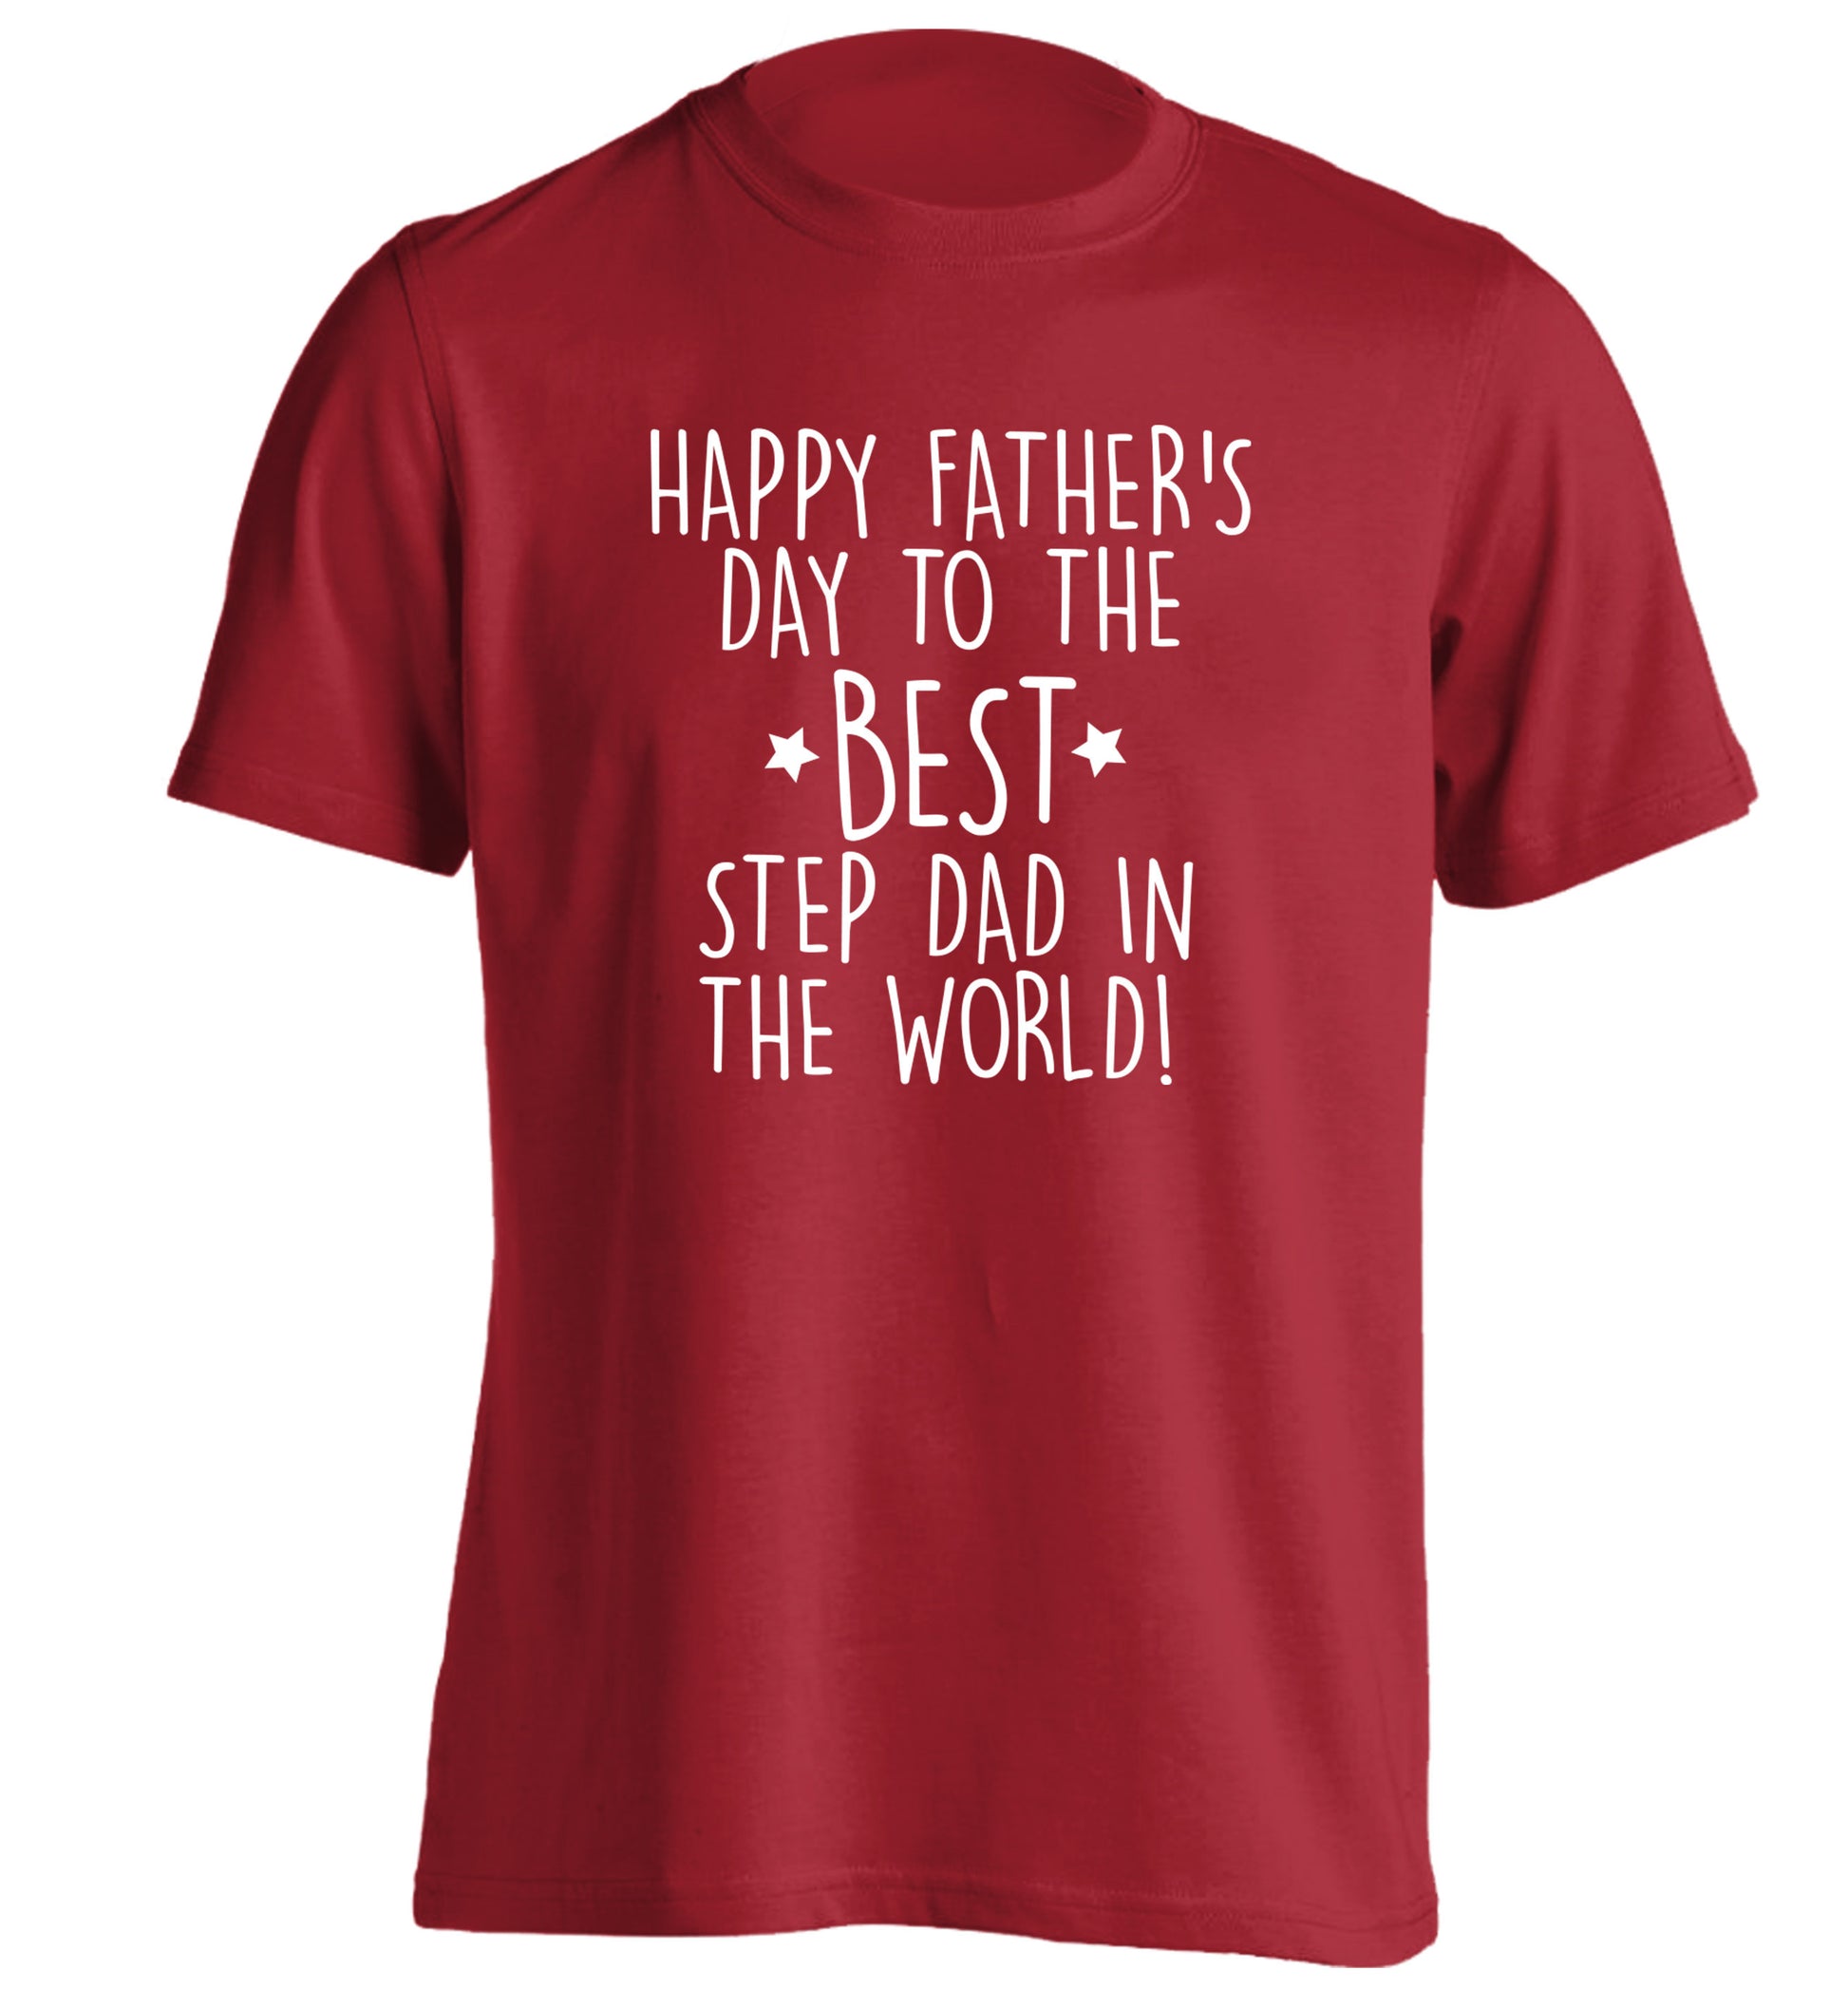 Happy Father's day to the best step dad in the world! adults unisex red Tshirt 2XL